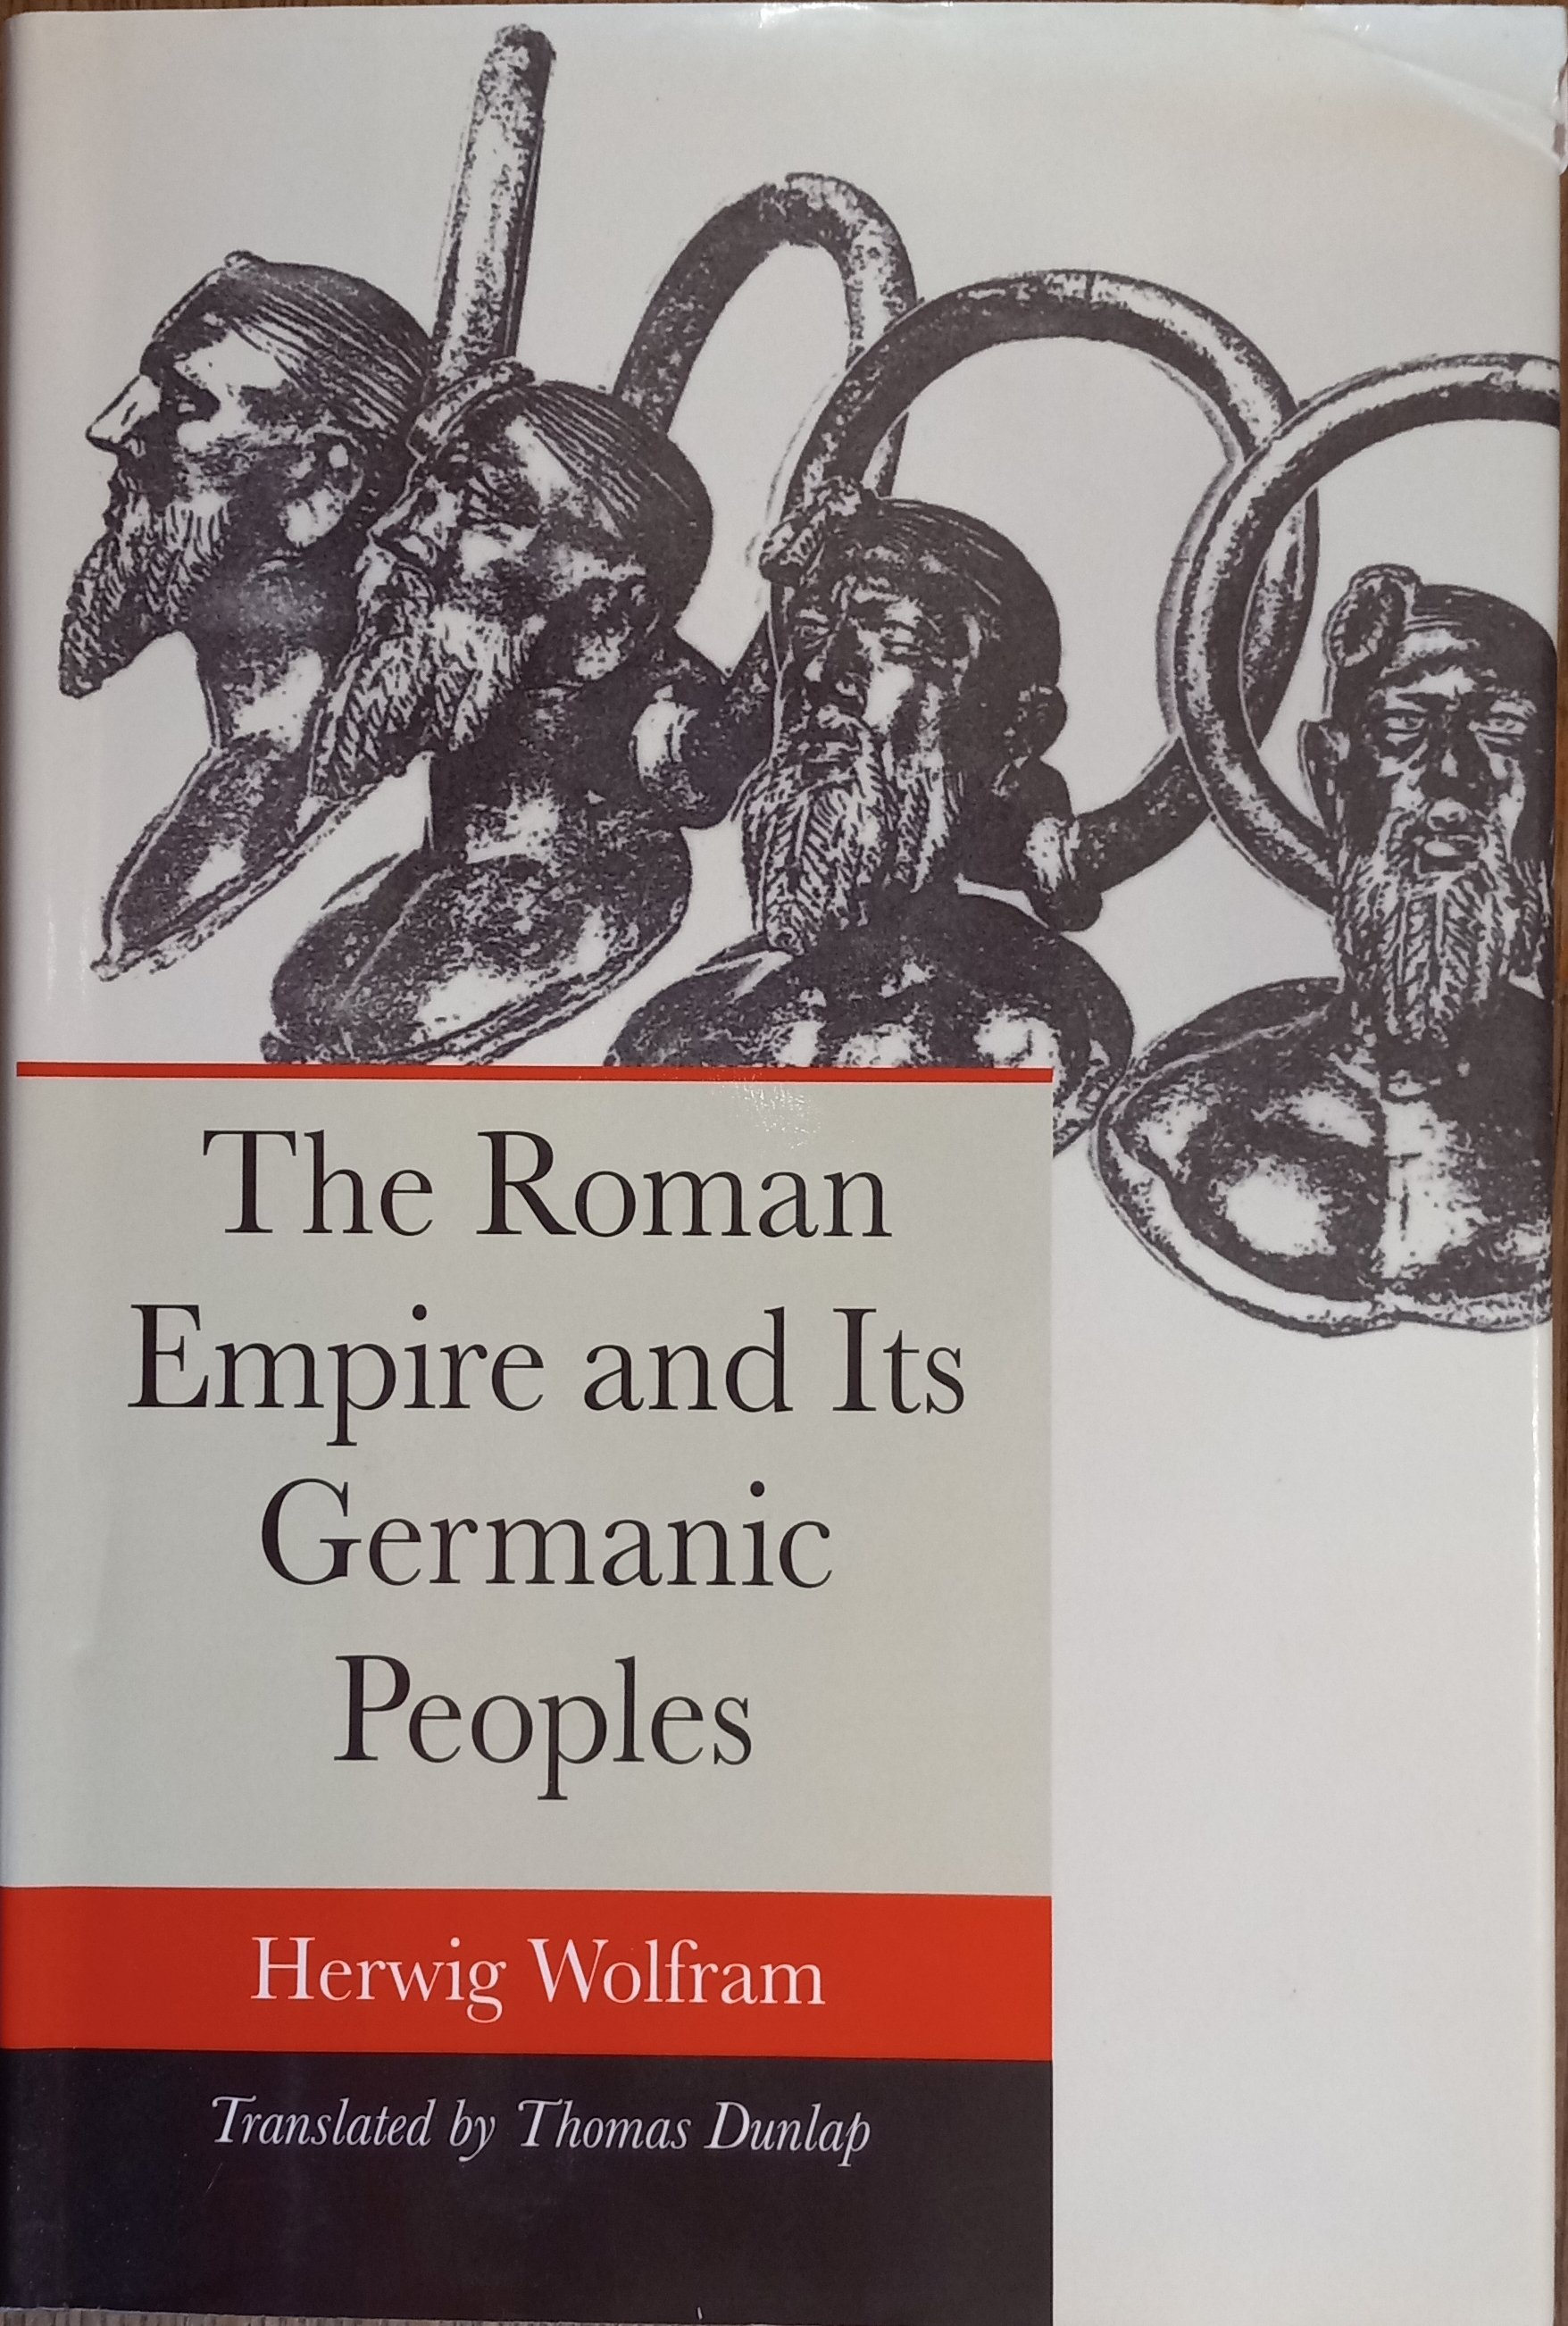 The Roman Empire and Its Germanic Peoples - Wolfram, Herwig; Dunlap, Thomas (trans.)